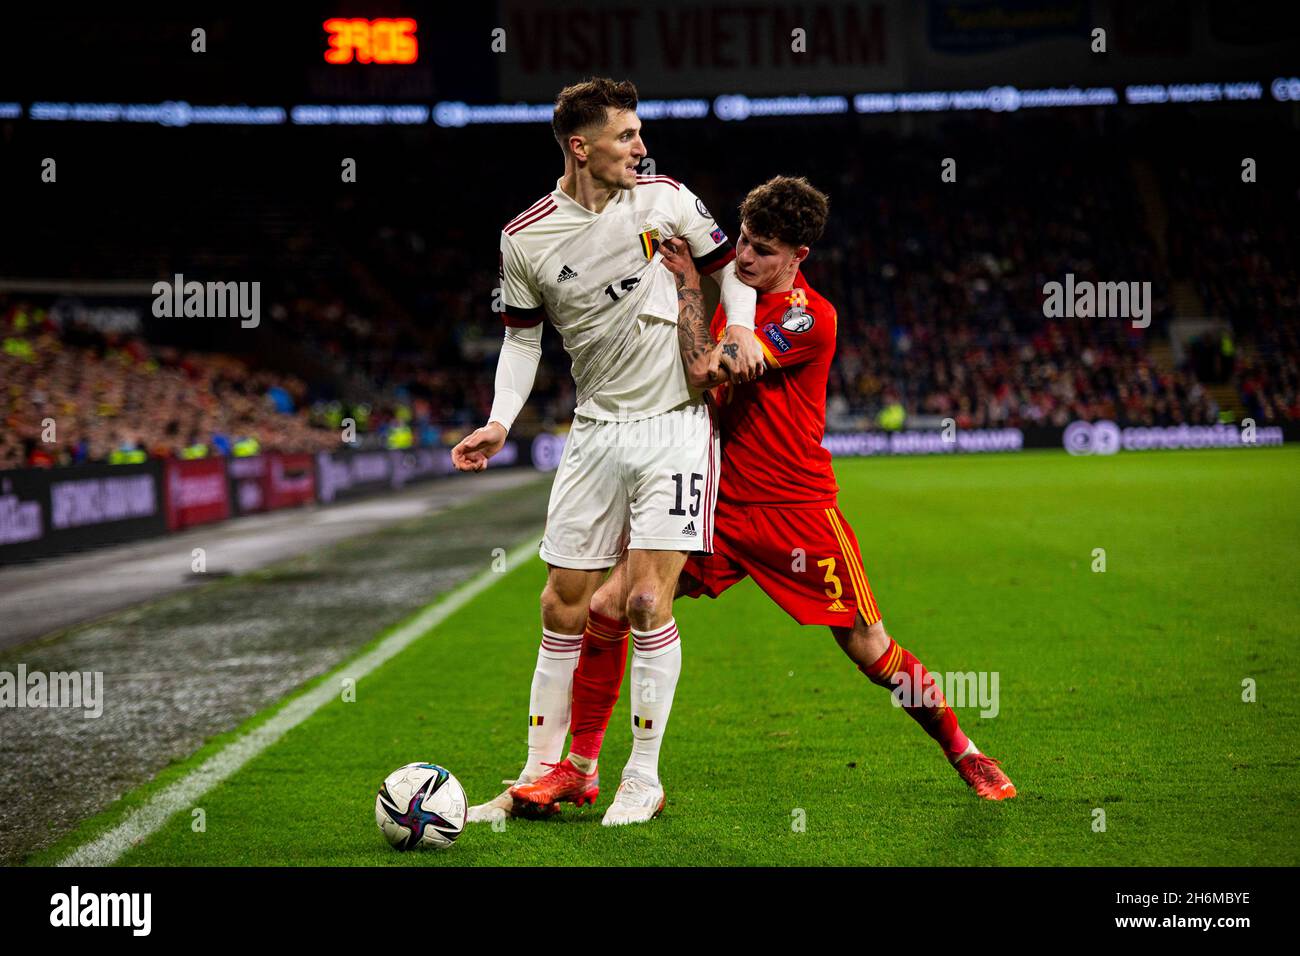 Cardiff, UK. 16th Nov, 2021. Thomas Meunier of Belgium in action against Neco Williams of Wales. Wales v Belgium in a 2022 FIFA World Cup Qualifier at the Cardiff City Stadium on the 16th November 2021. Credit: Lewis Mitchell/Alamy Live News Stock Photo